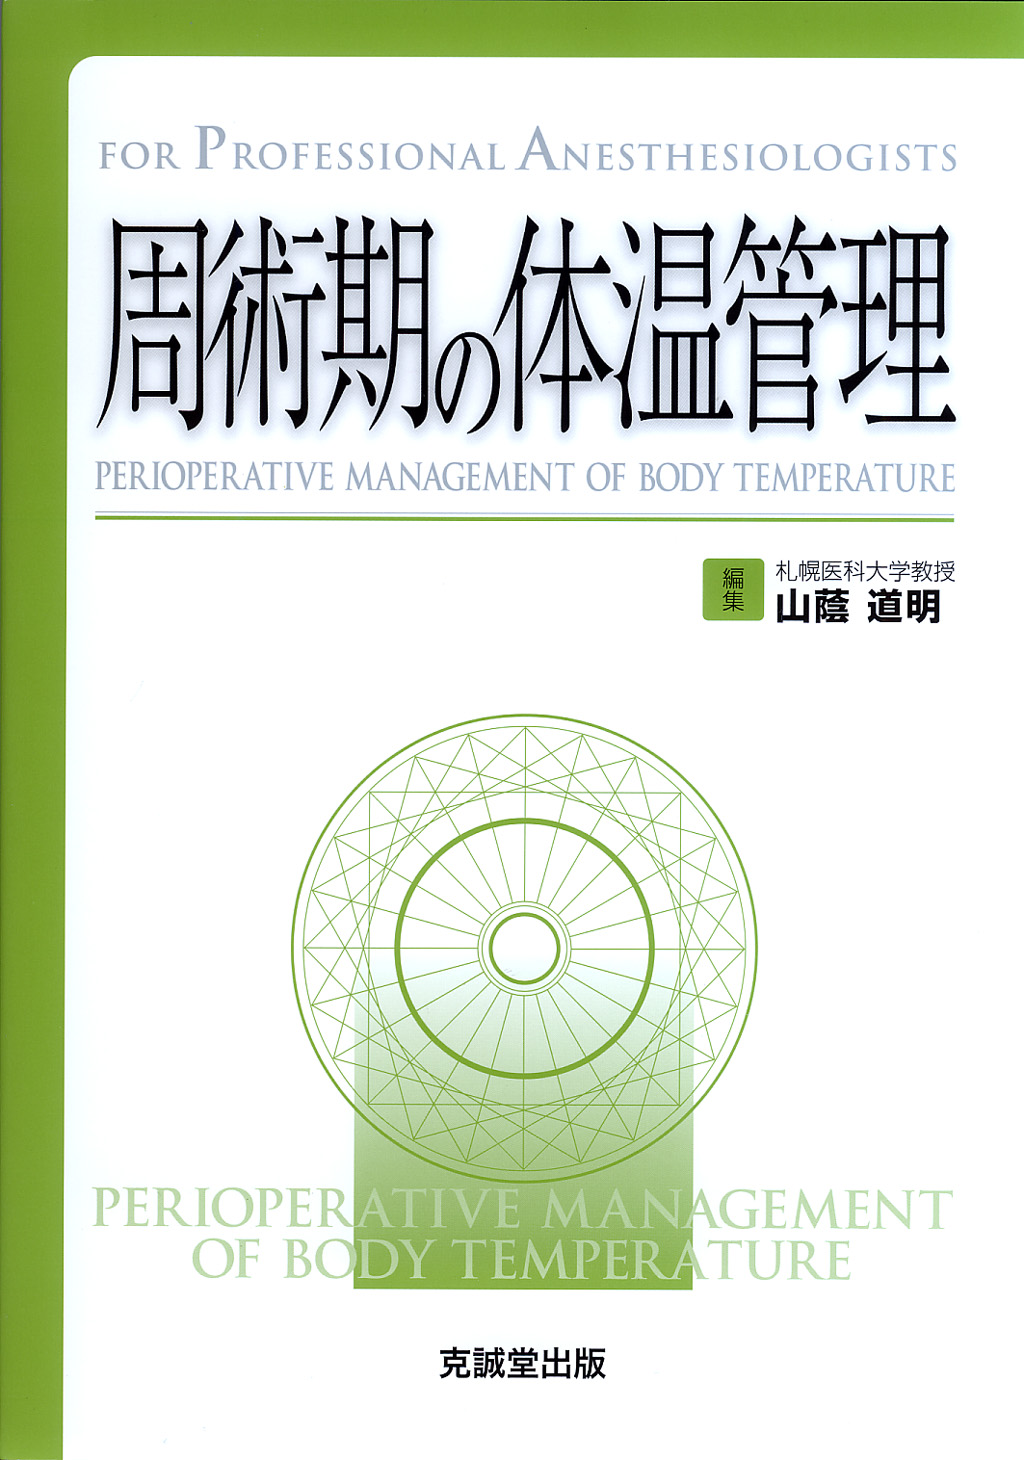 A11994555]周術期の体温管理 (for Professional Anesthesiologists)-